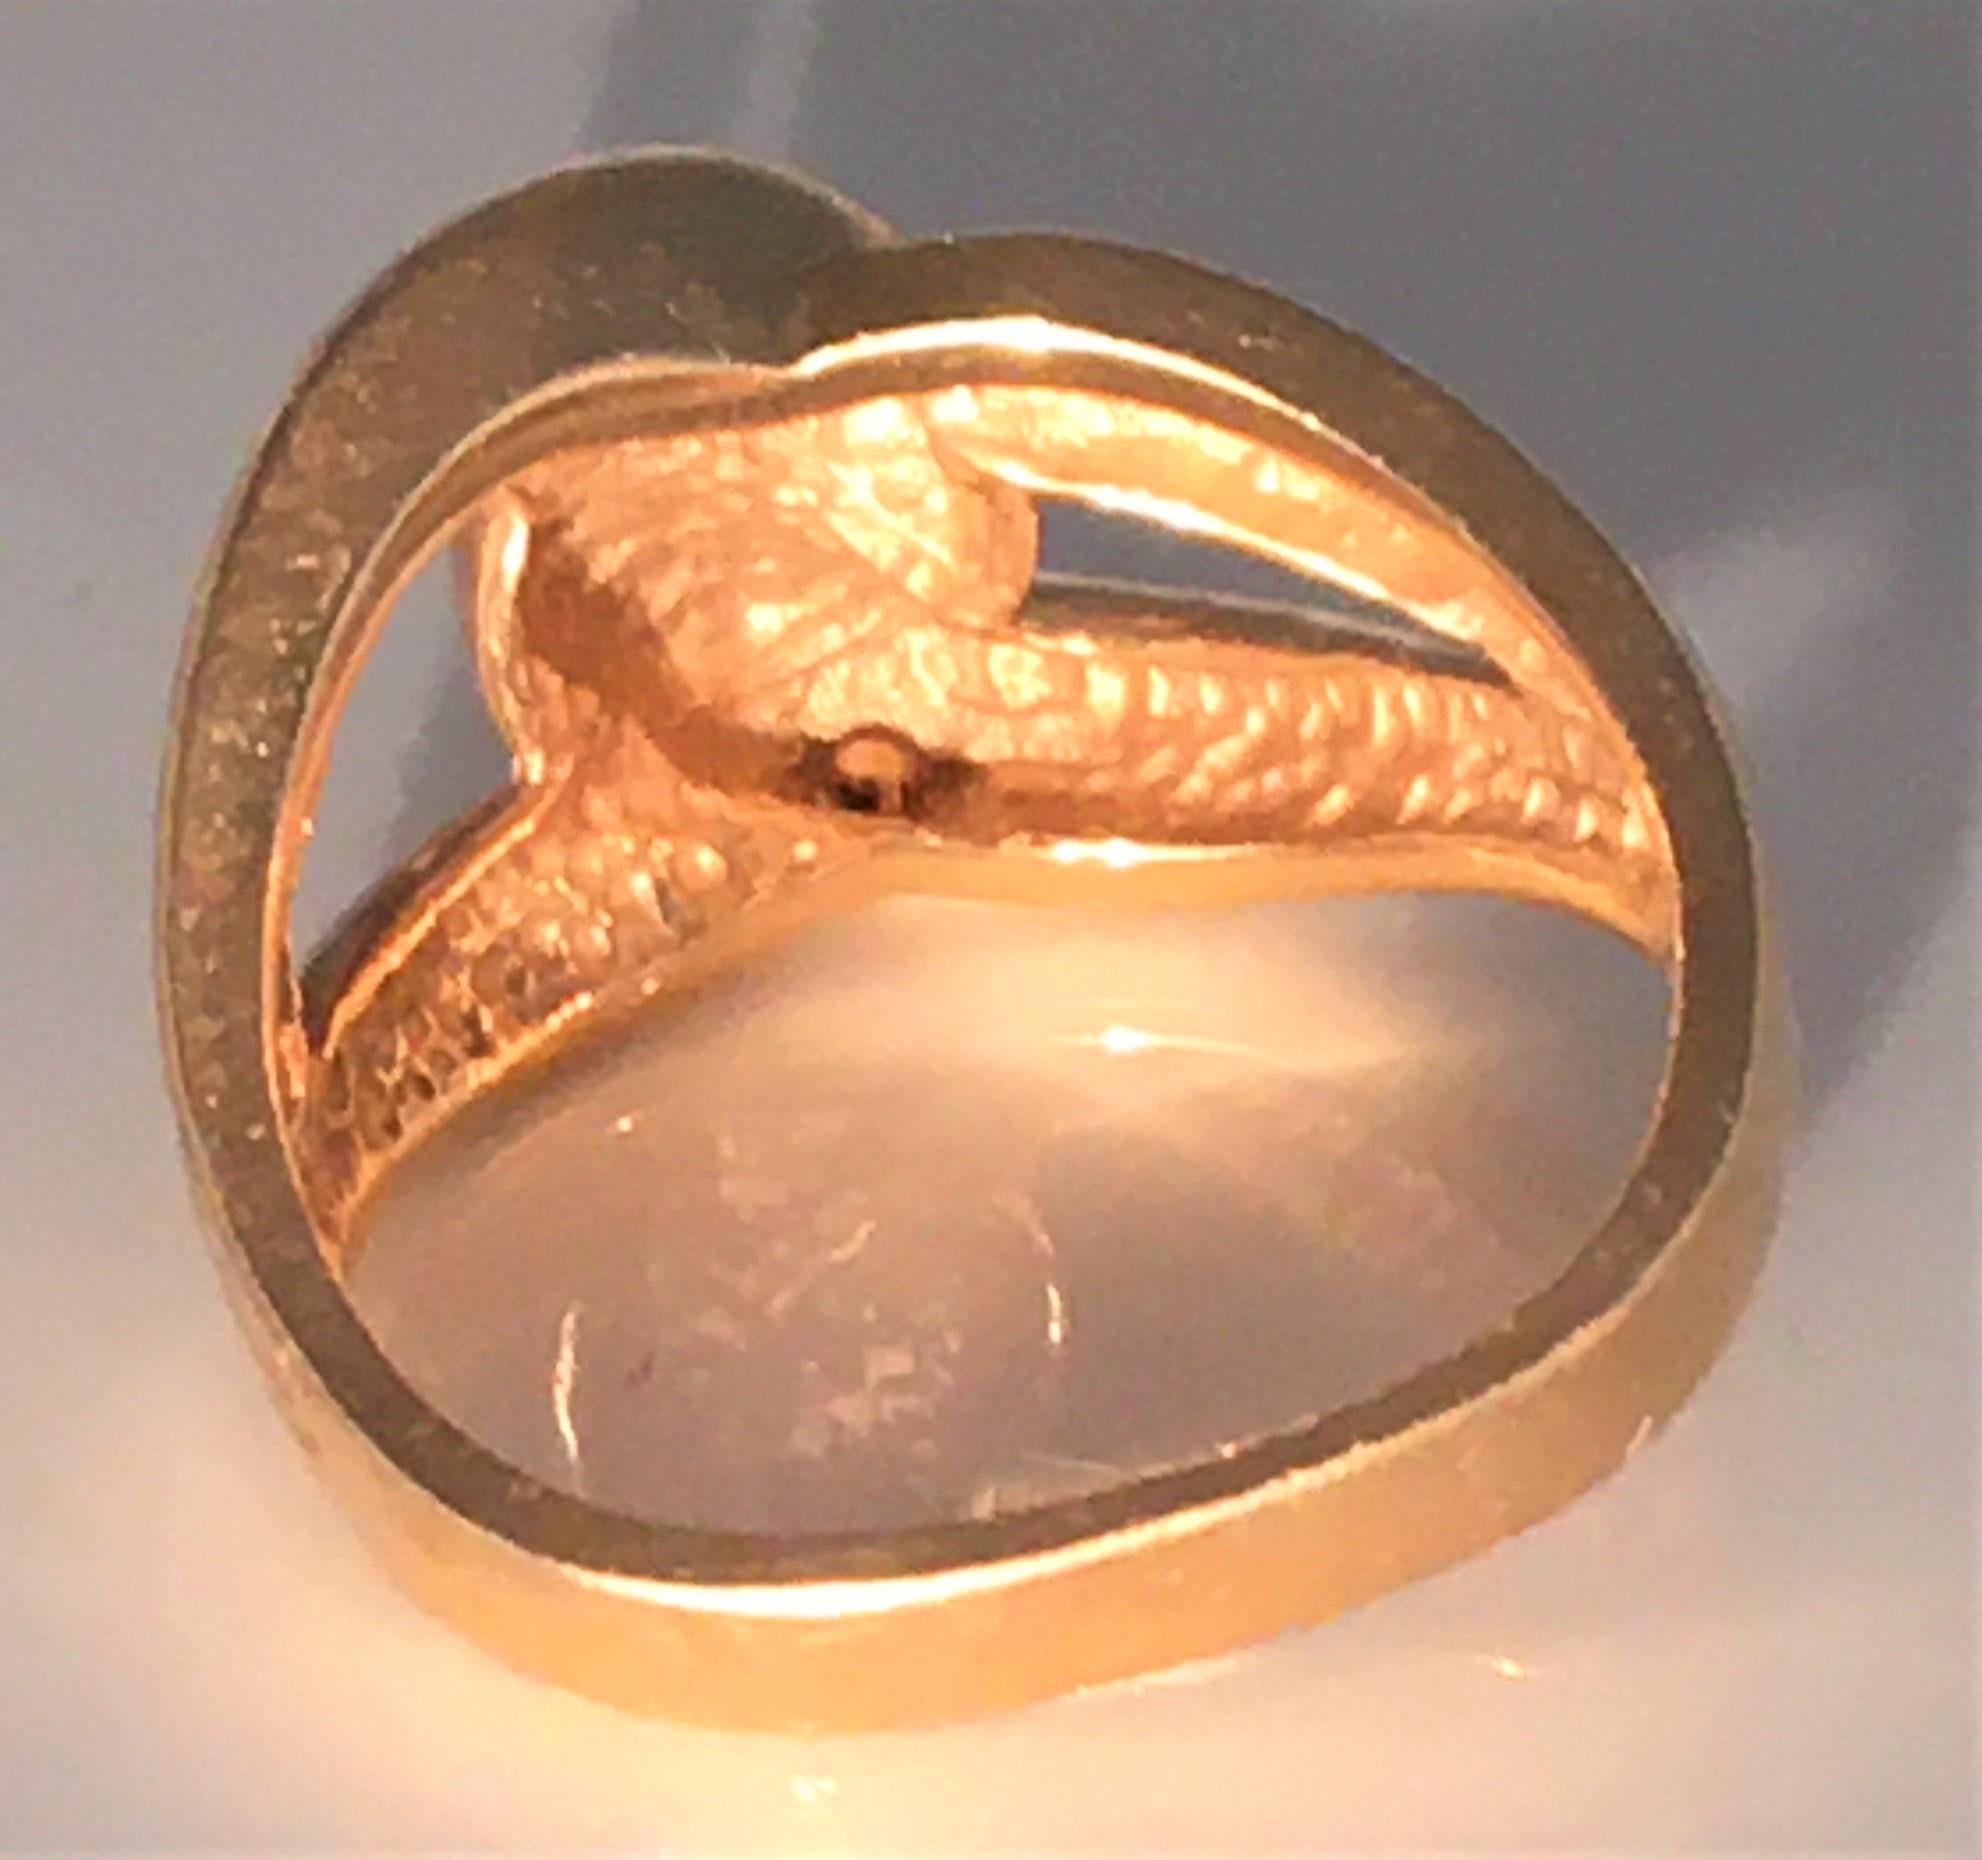 This infinity symbol ring can be worn daily and will definitely get noticed.
14 karat yellow gold
Infinity knot
There are minor scratches on the ring (please see pictures)
Stamped 